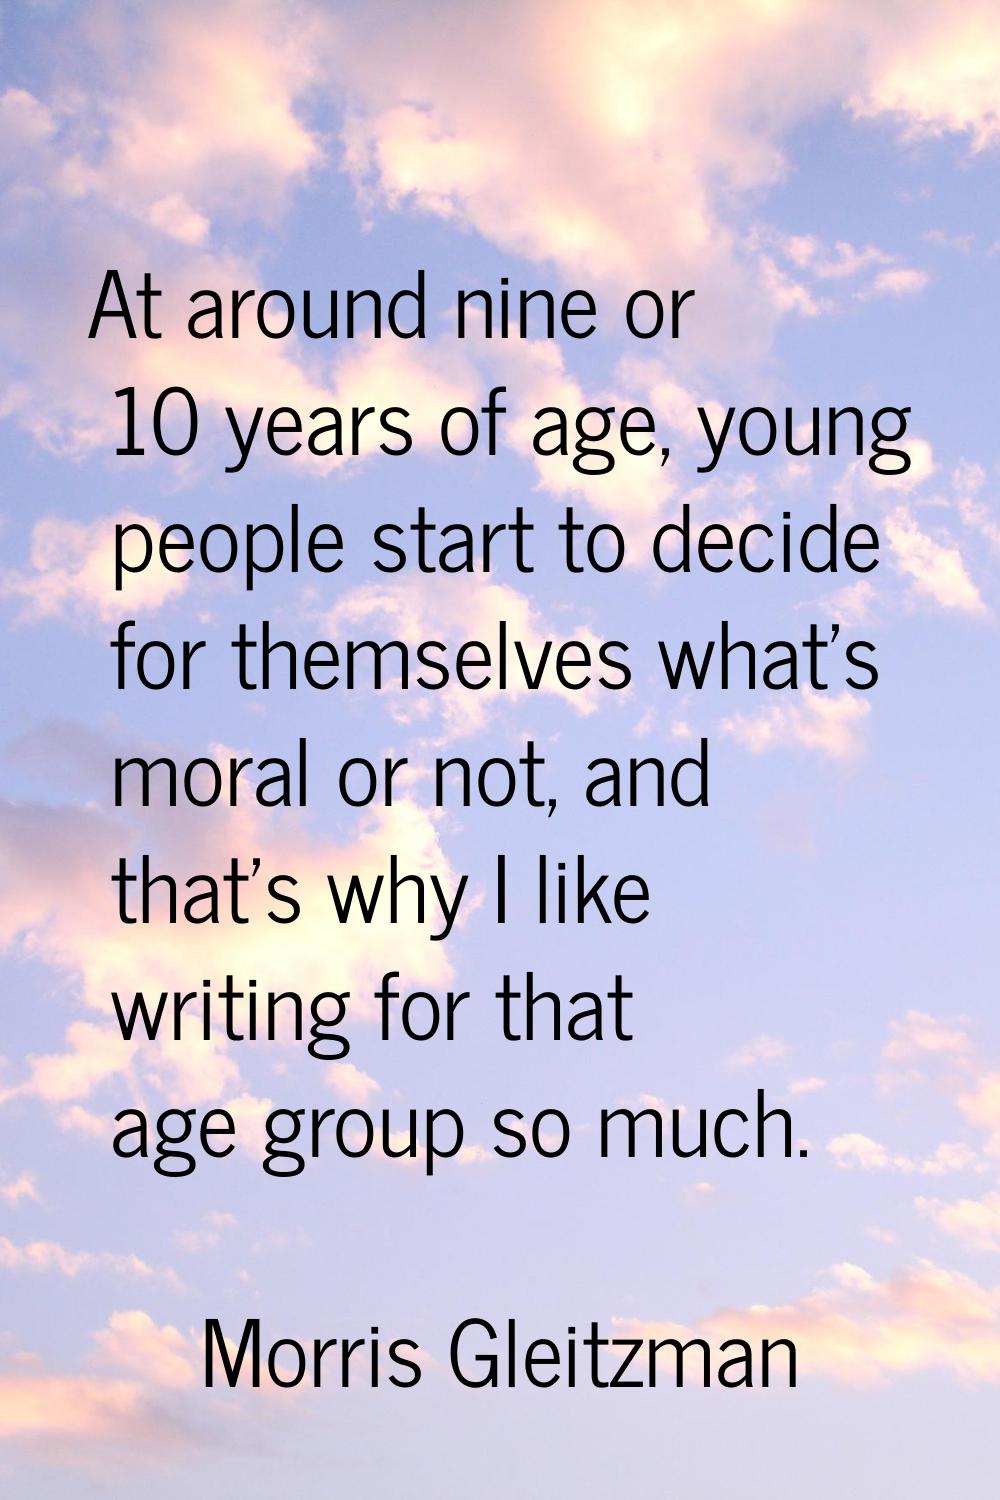 At around nine or 10 years of age, young people start to decide for themselves what's moral or not,